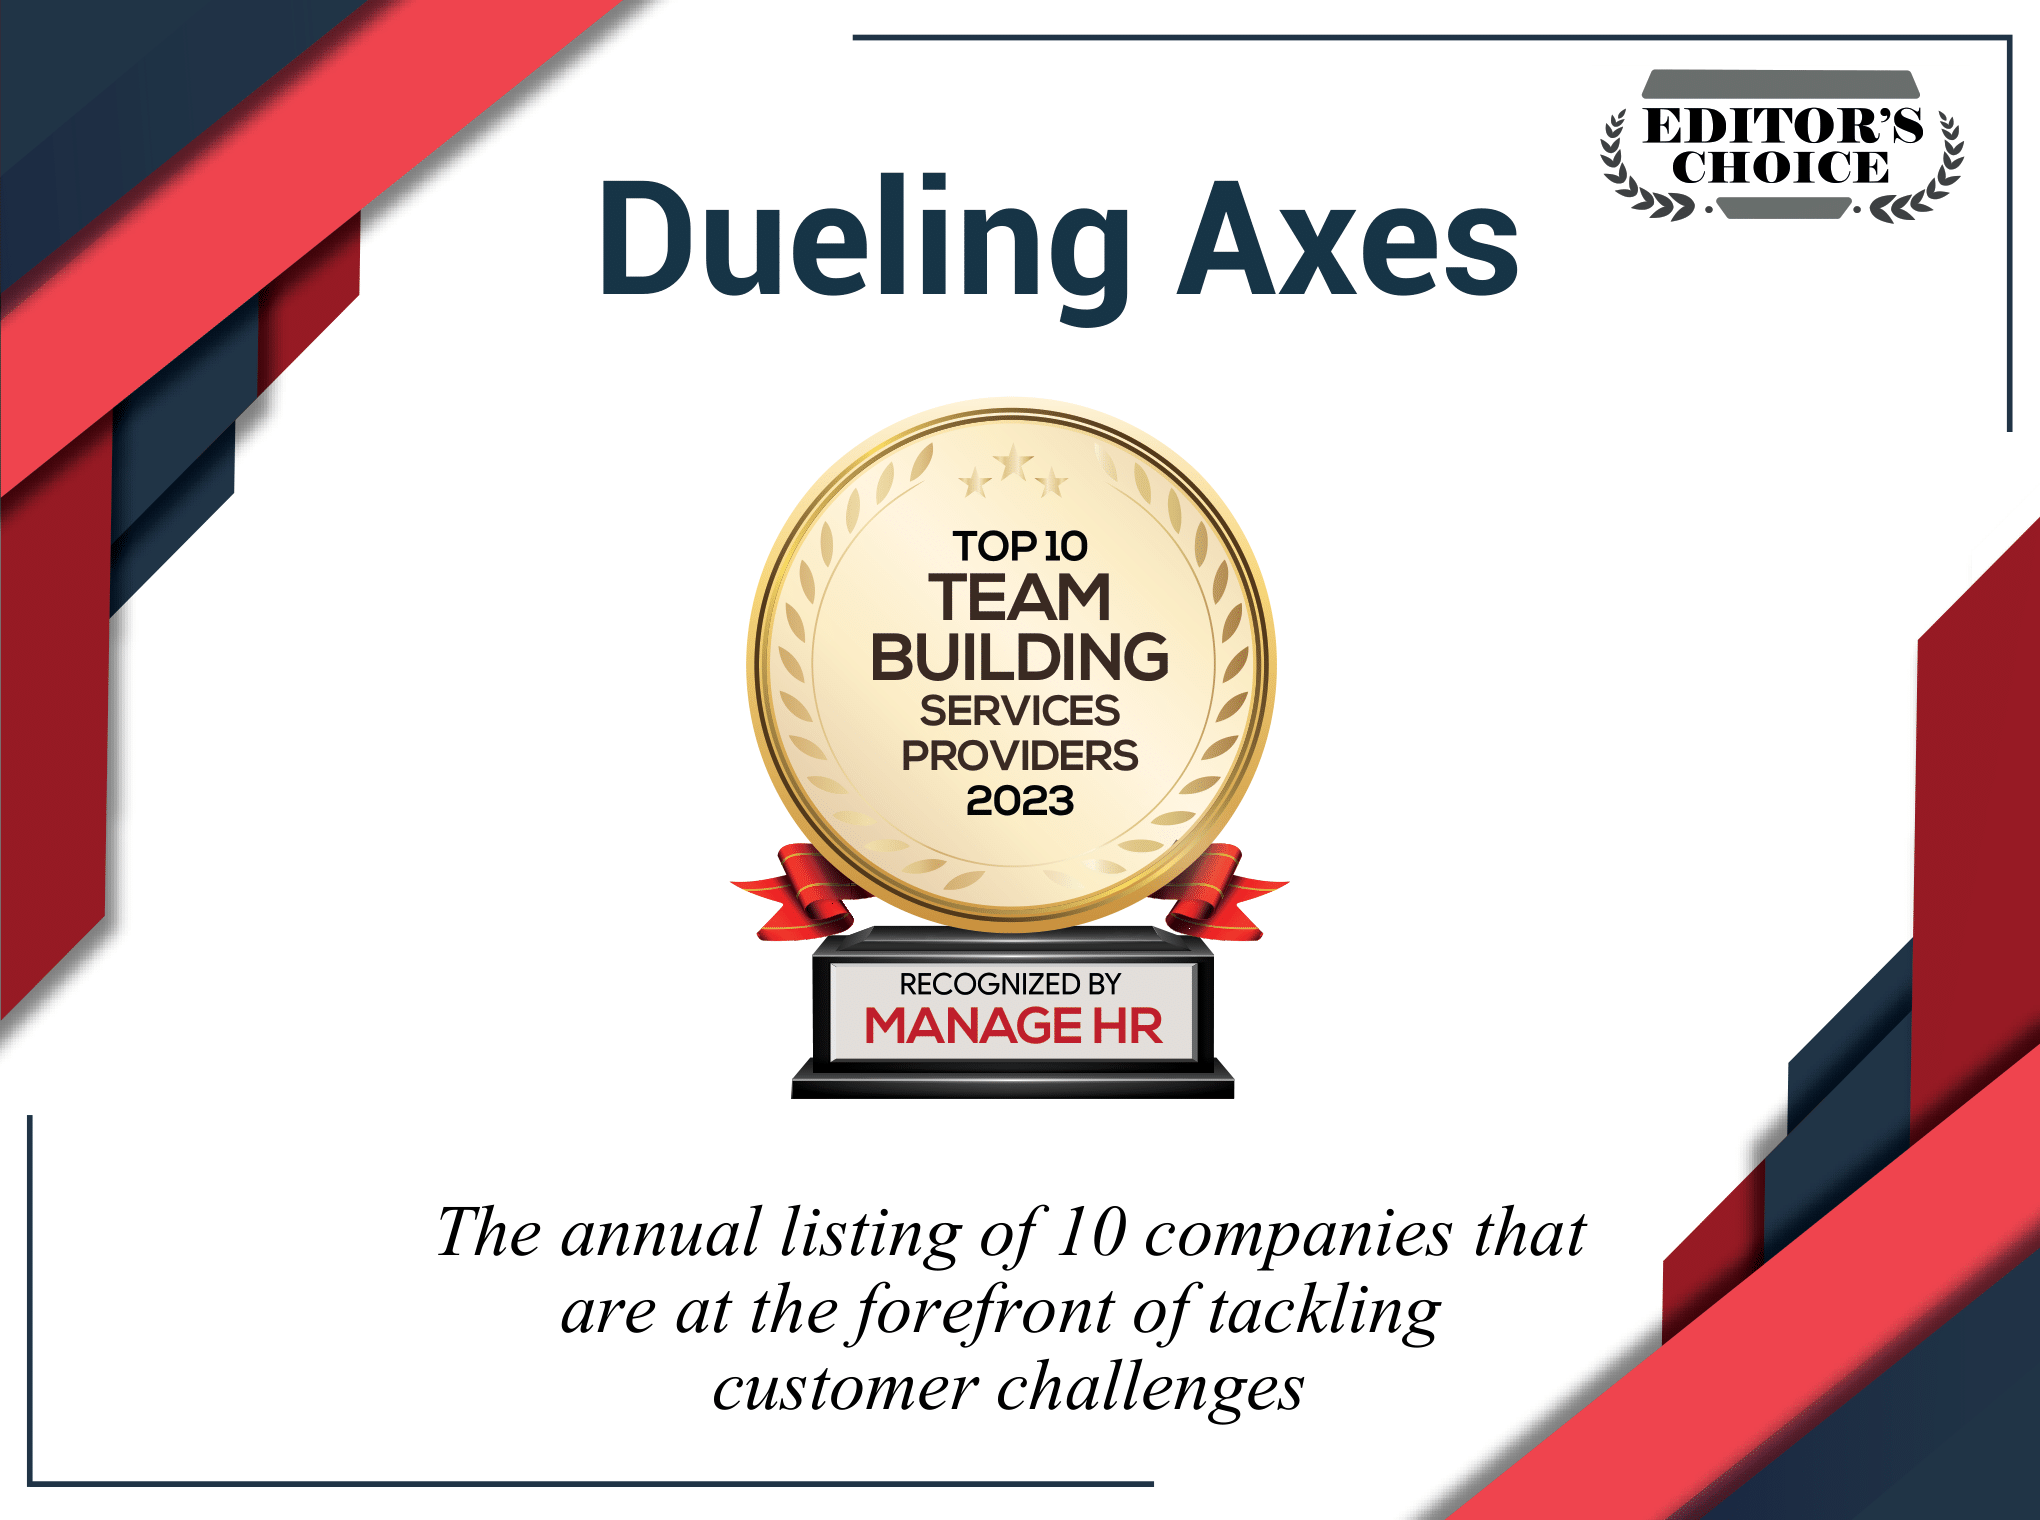 Dueling Axes, with Locations in Nevada and Ohio, Scores Top 10 Team Building Service Provider 2023 and Awarded Editor's Choice Designation